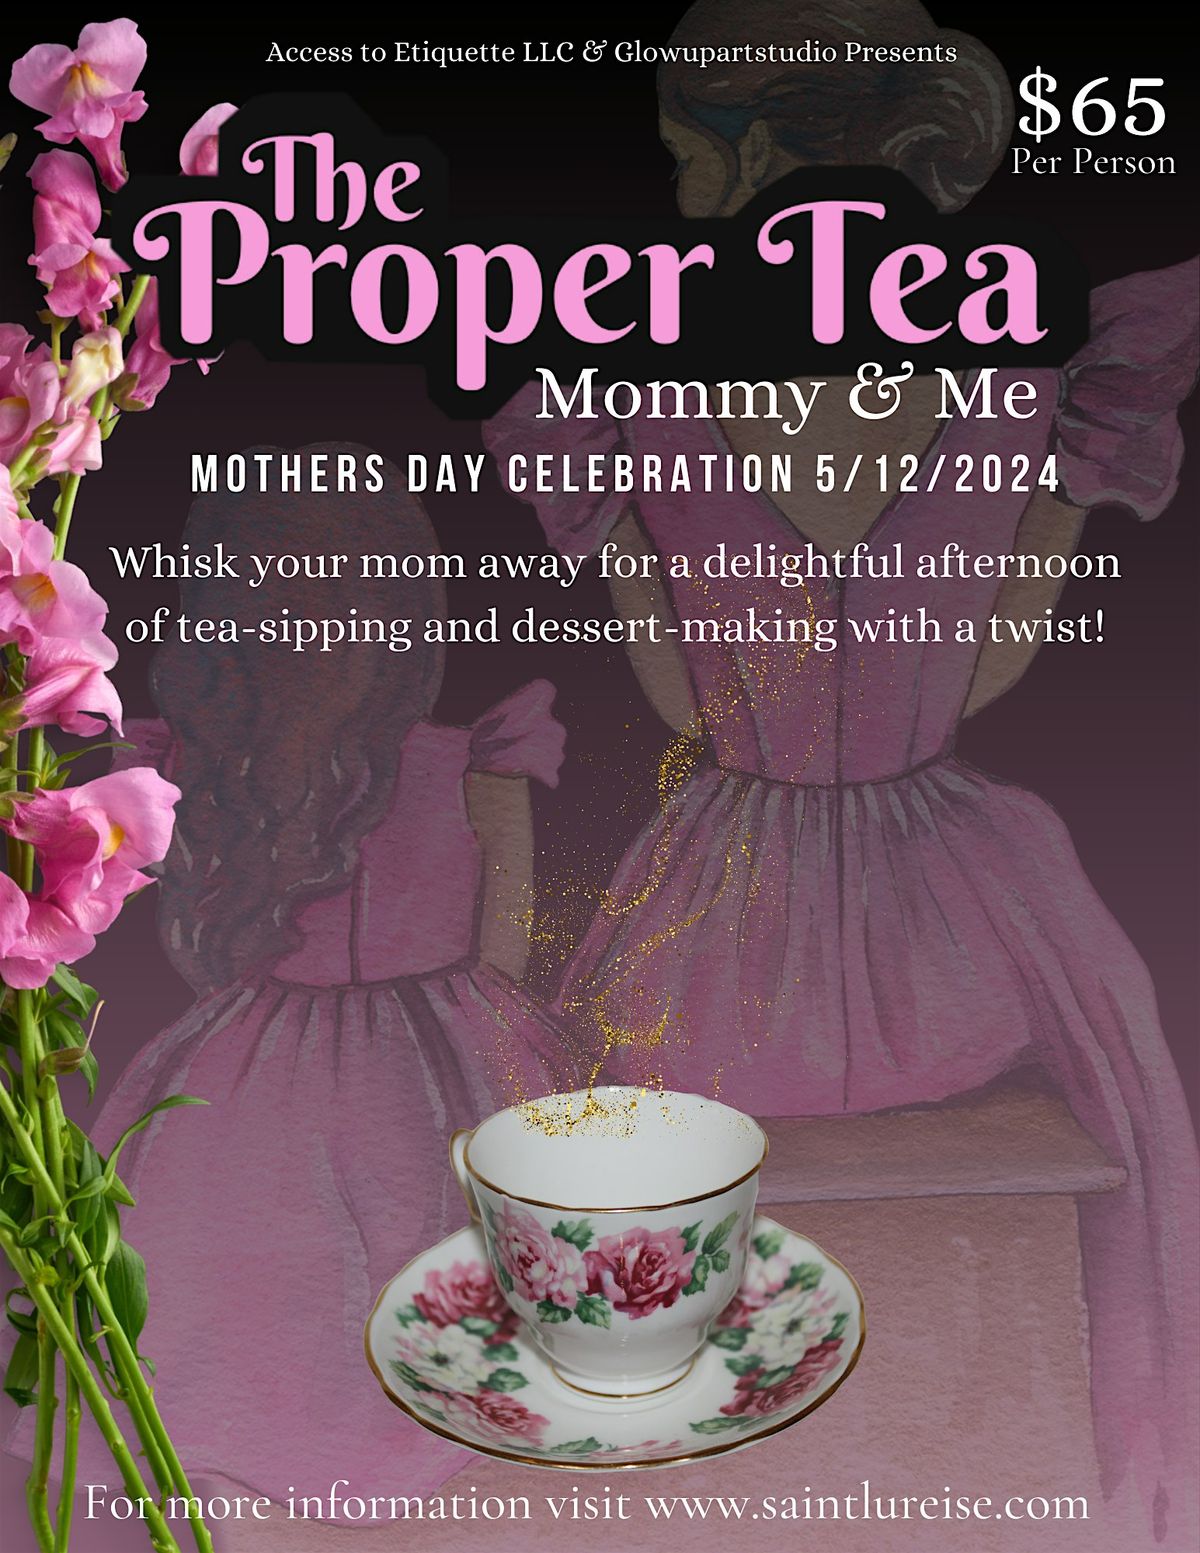 The Proper Tea  with a Twist Mothers Day Experience